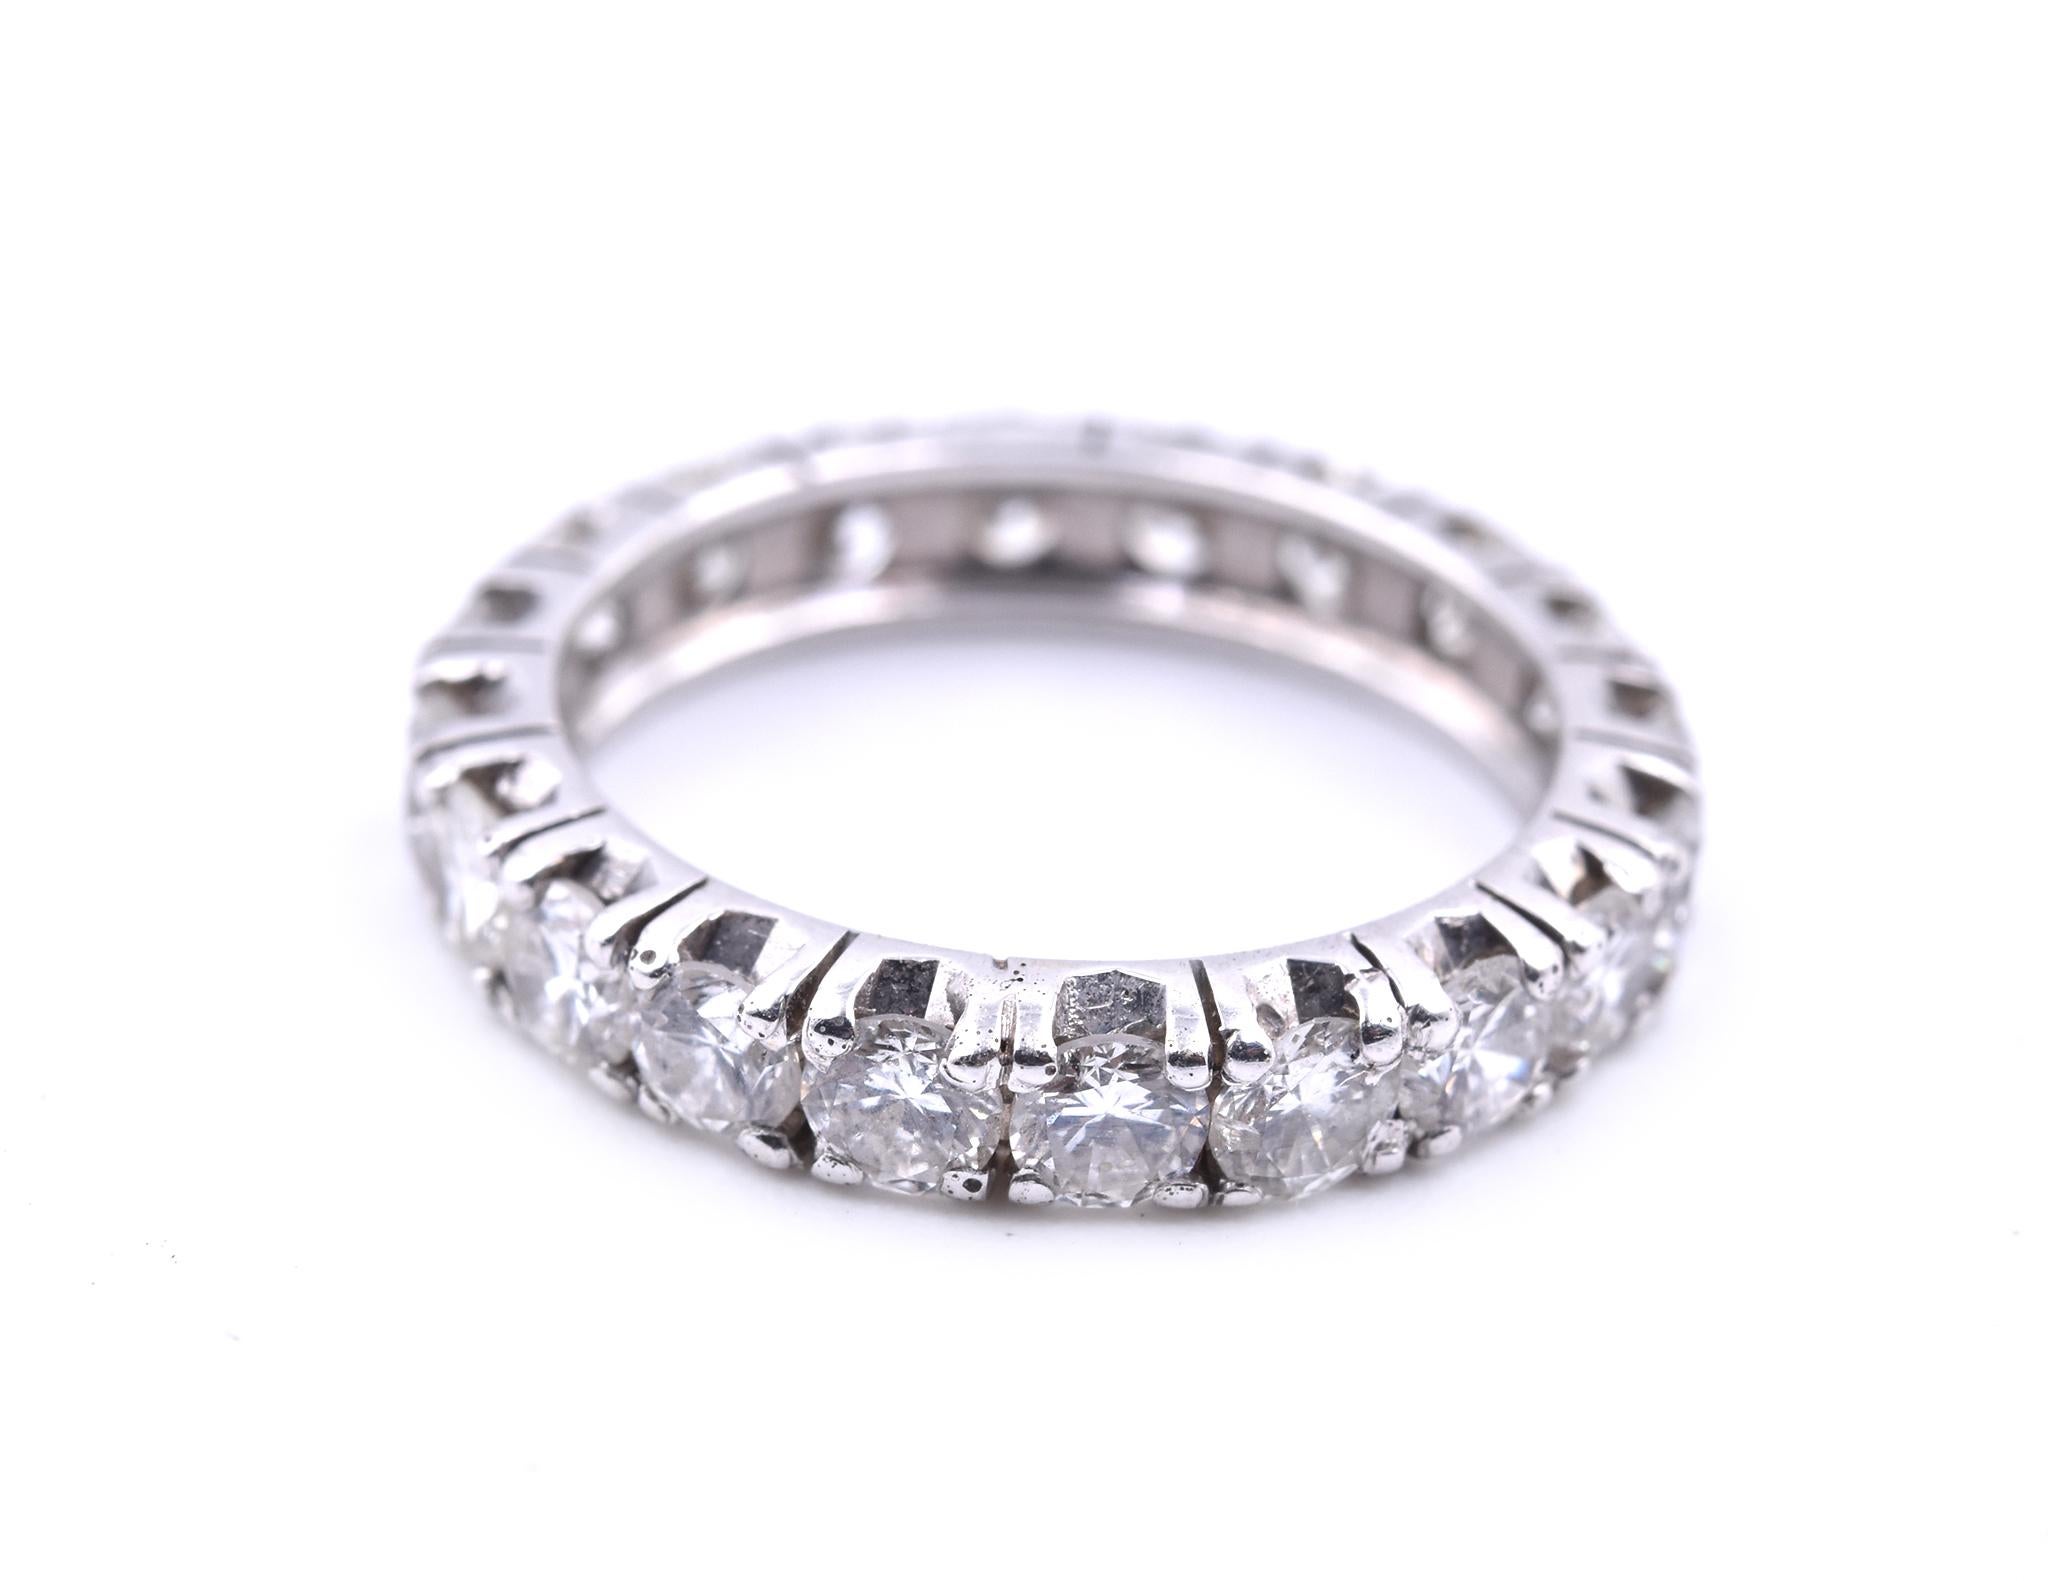 Designer: custom design
Material: 18k white gold
Diamonds: 20 round brilliant cut= 1.80cttw
Color: H
Clarity: SI1
Size: 4 ½ 
Dimensions: ring is 3.29mm wide
Weight: 2.19 grams
